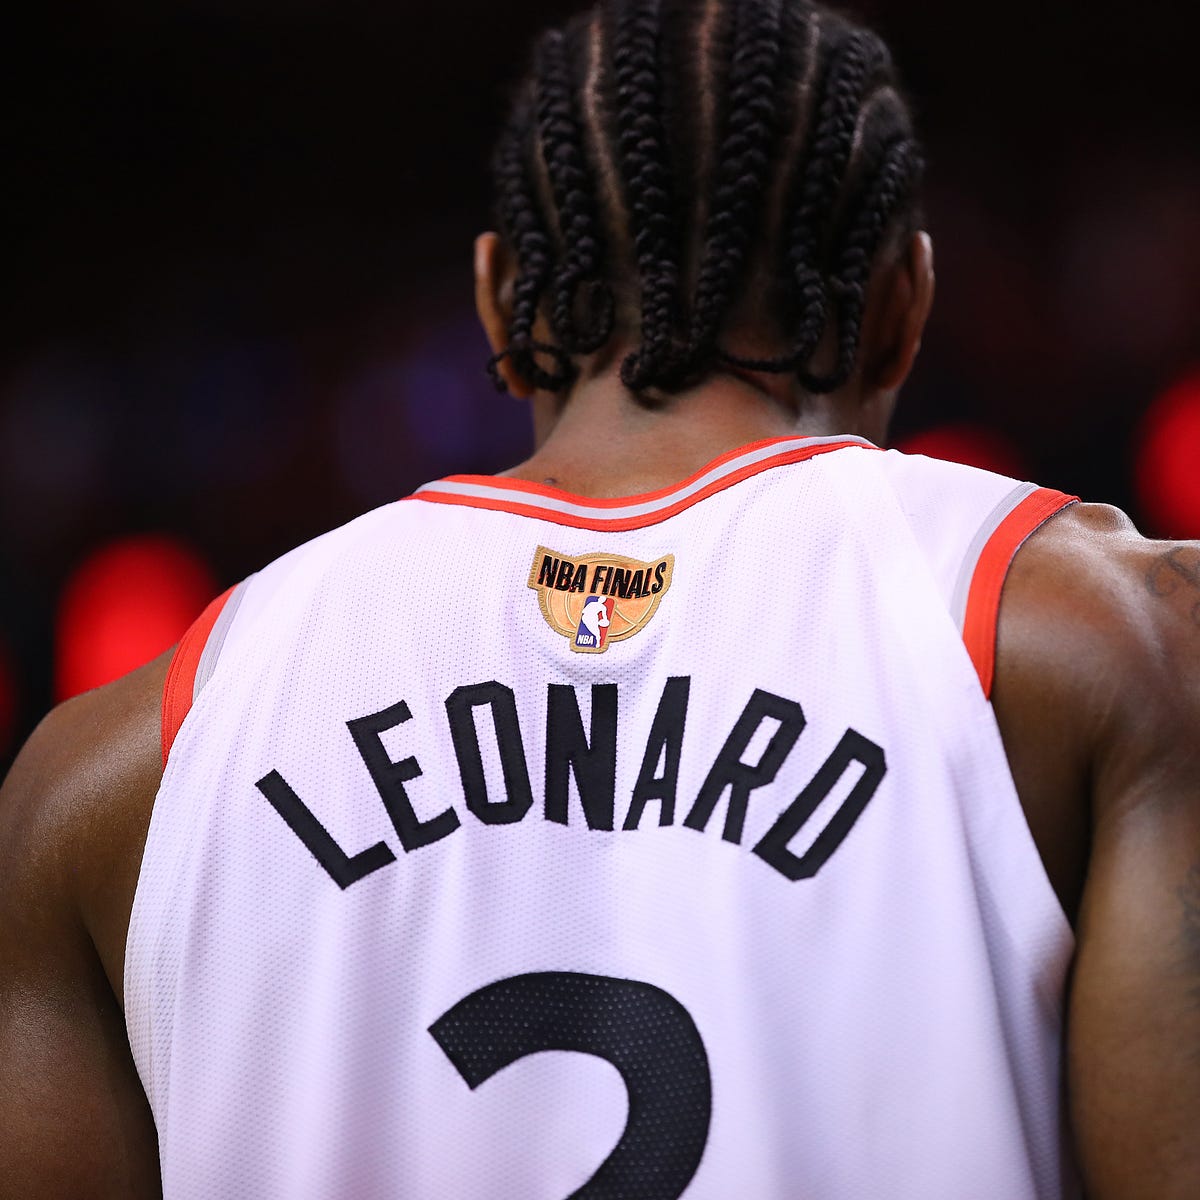 The moments immediately following Kawhi Leonard's shot are what